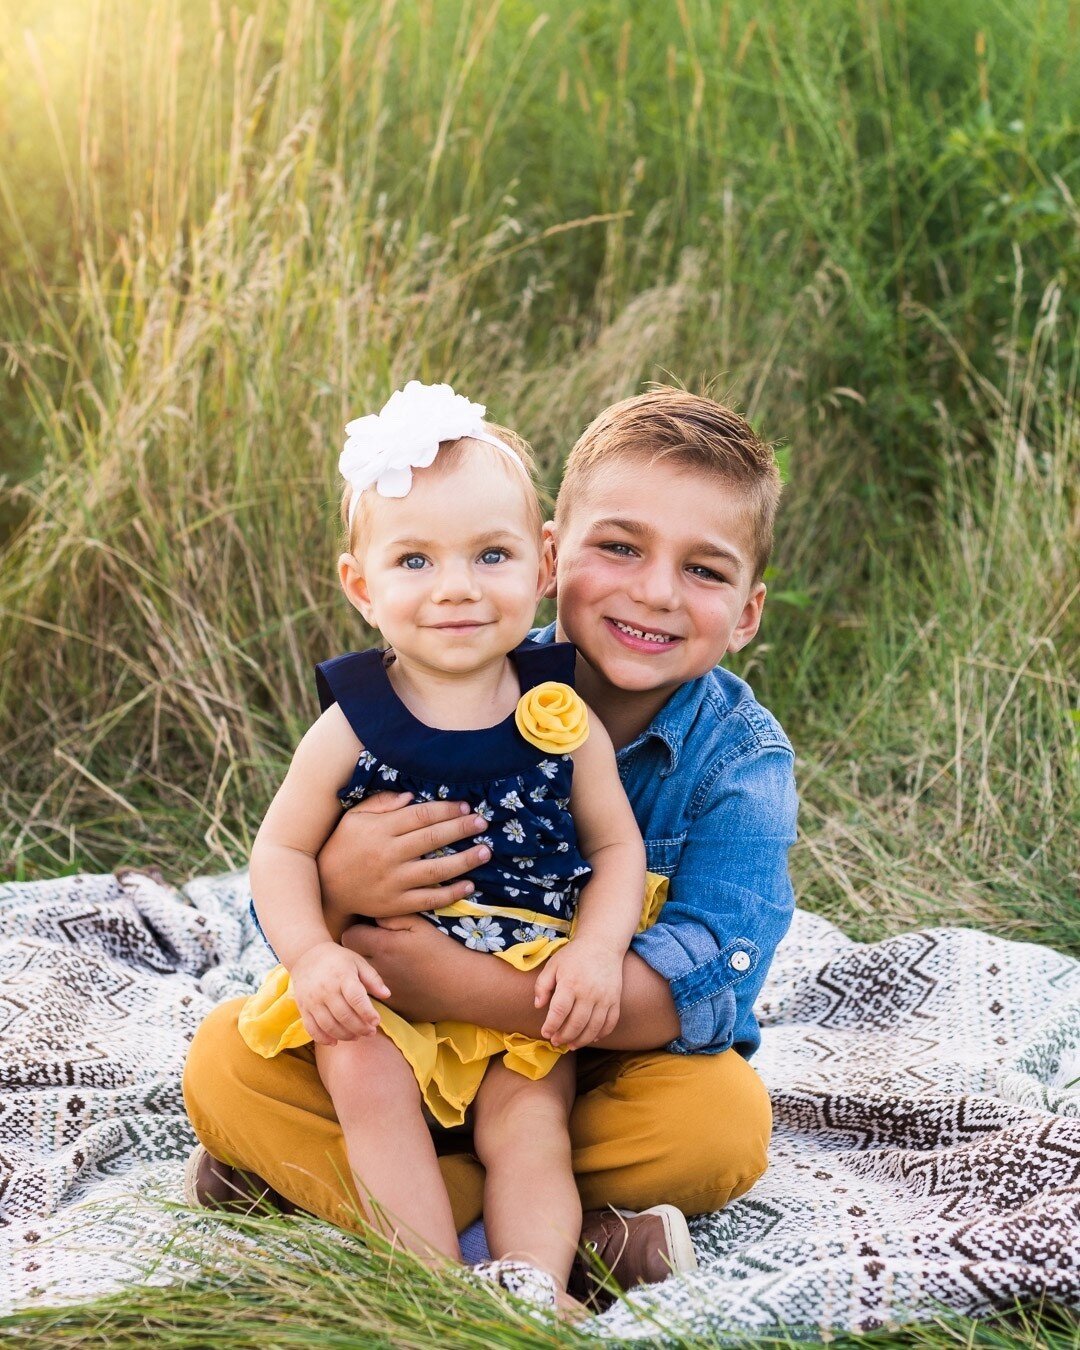 There's nothing quite like a big brother! ❤️

#familylove #familyiseverything #familyshare #peoriaillinoisphotographer #centralillinoisphotographer #centralillinoisfamilyphotographer #centralillinois #centralillinoisphotography #love #familyphotograp